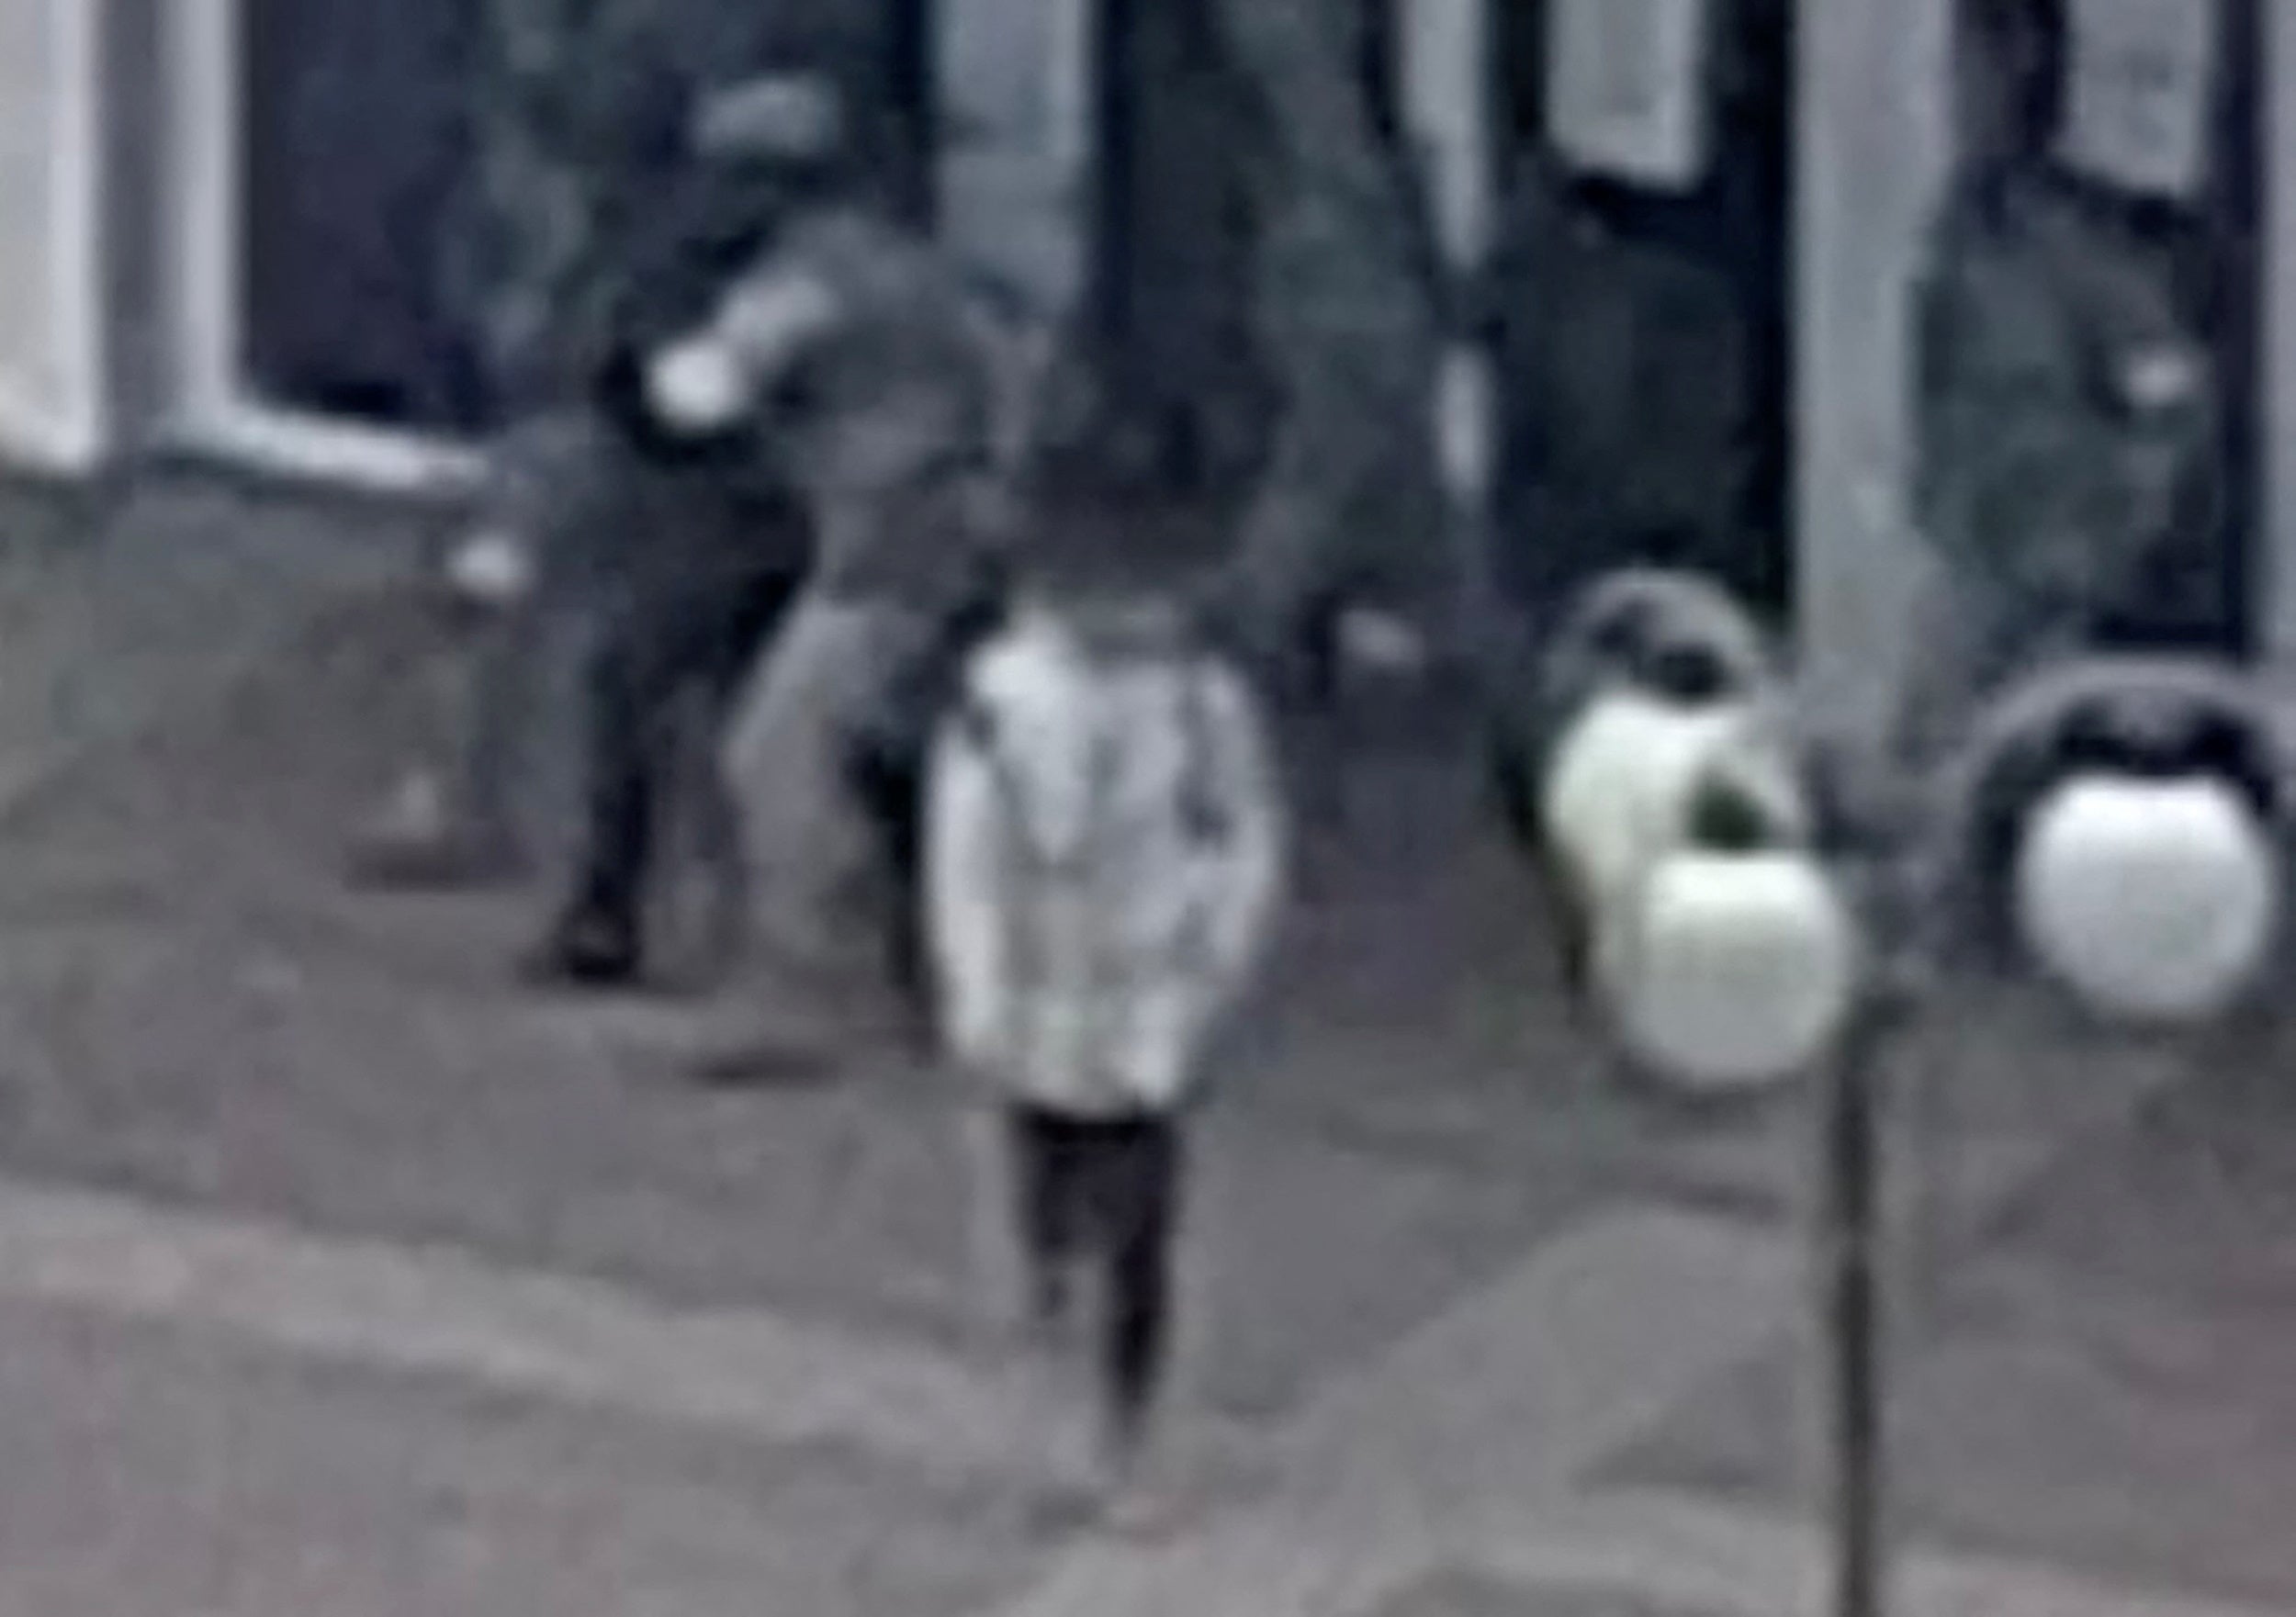 CCTV image appears to show Ivan Fedorov being kidnapped